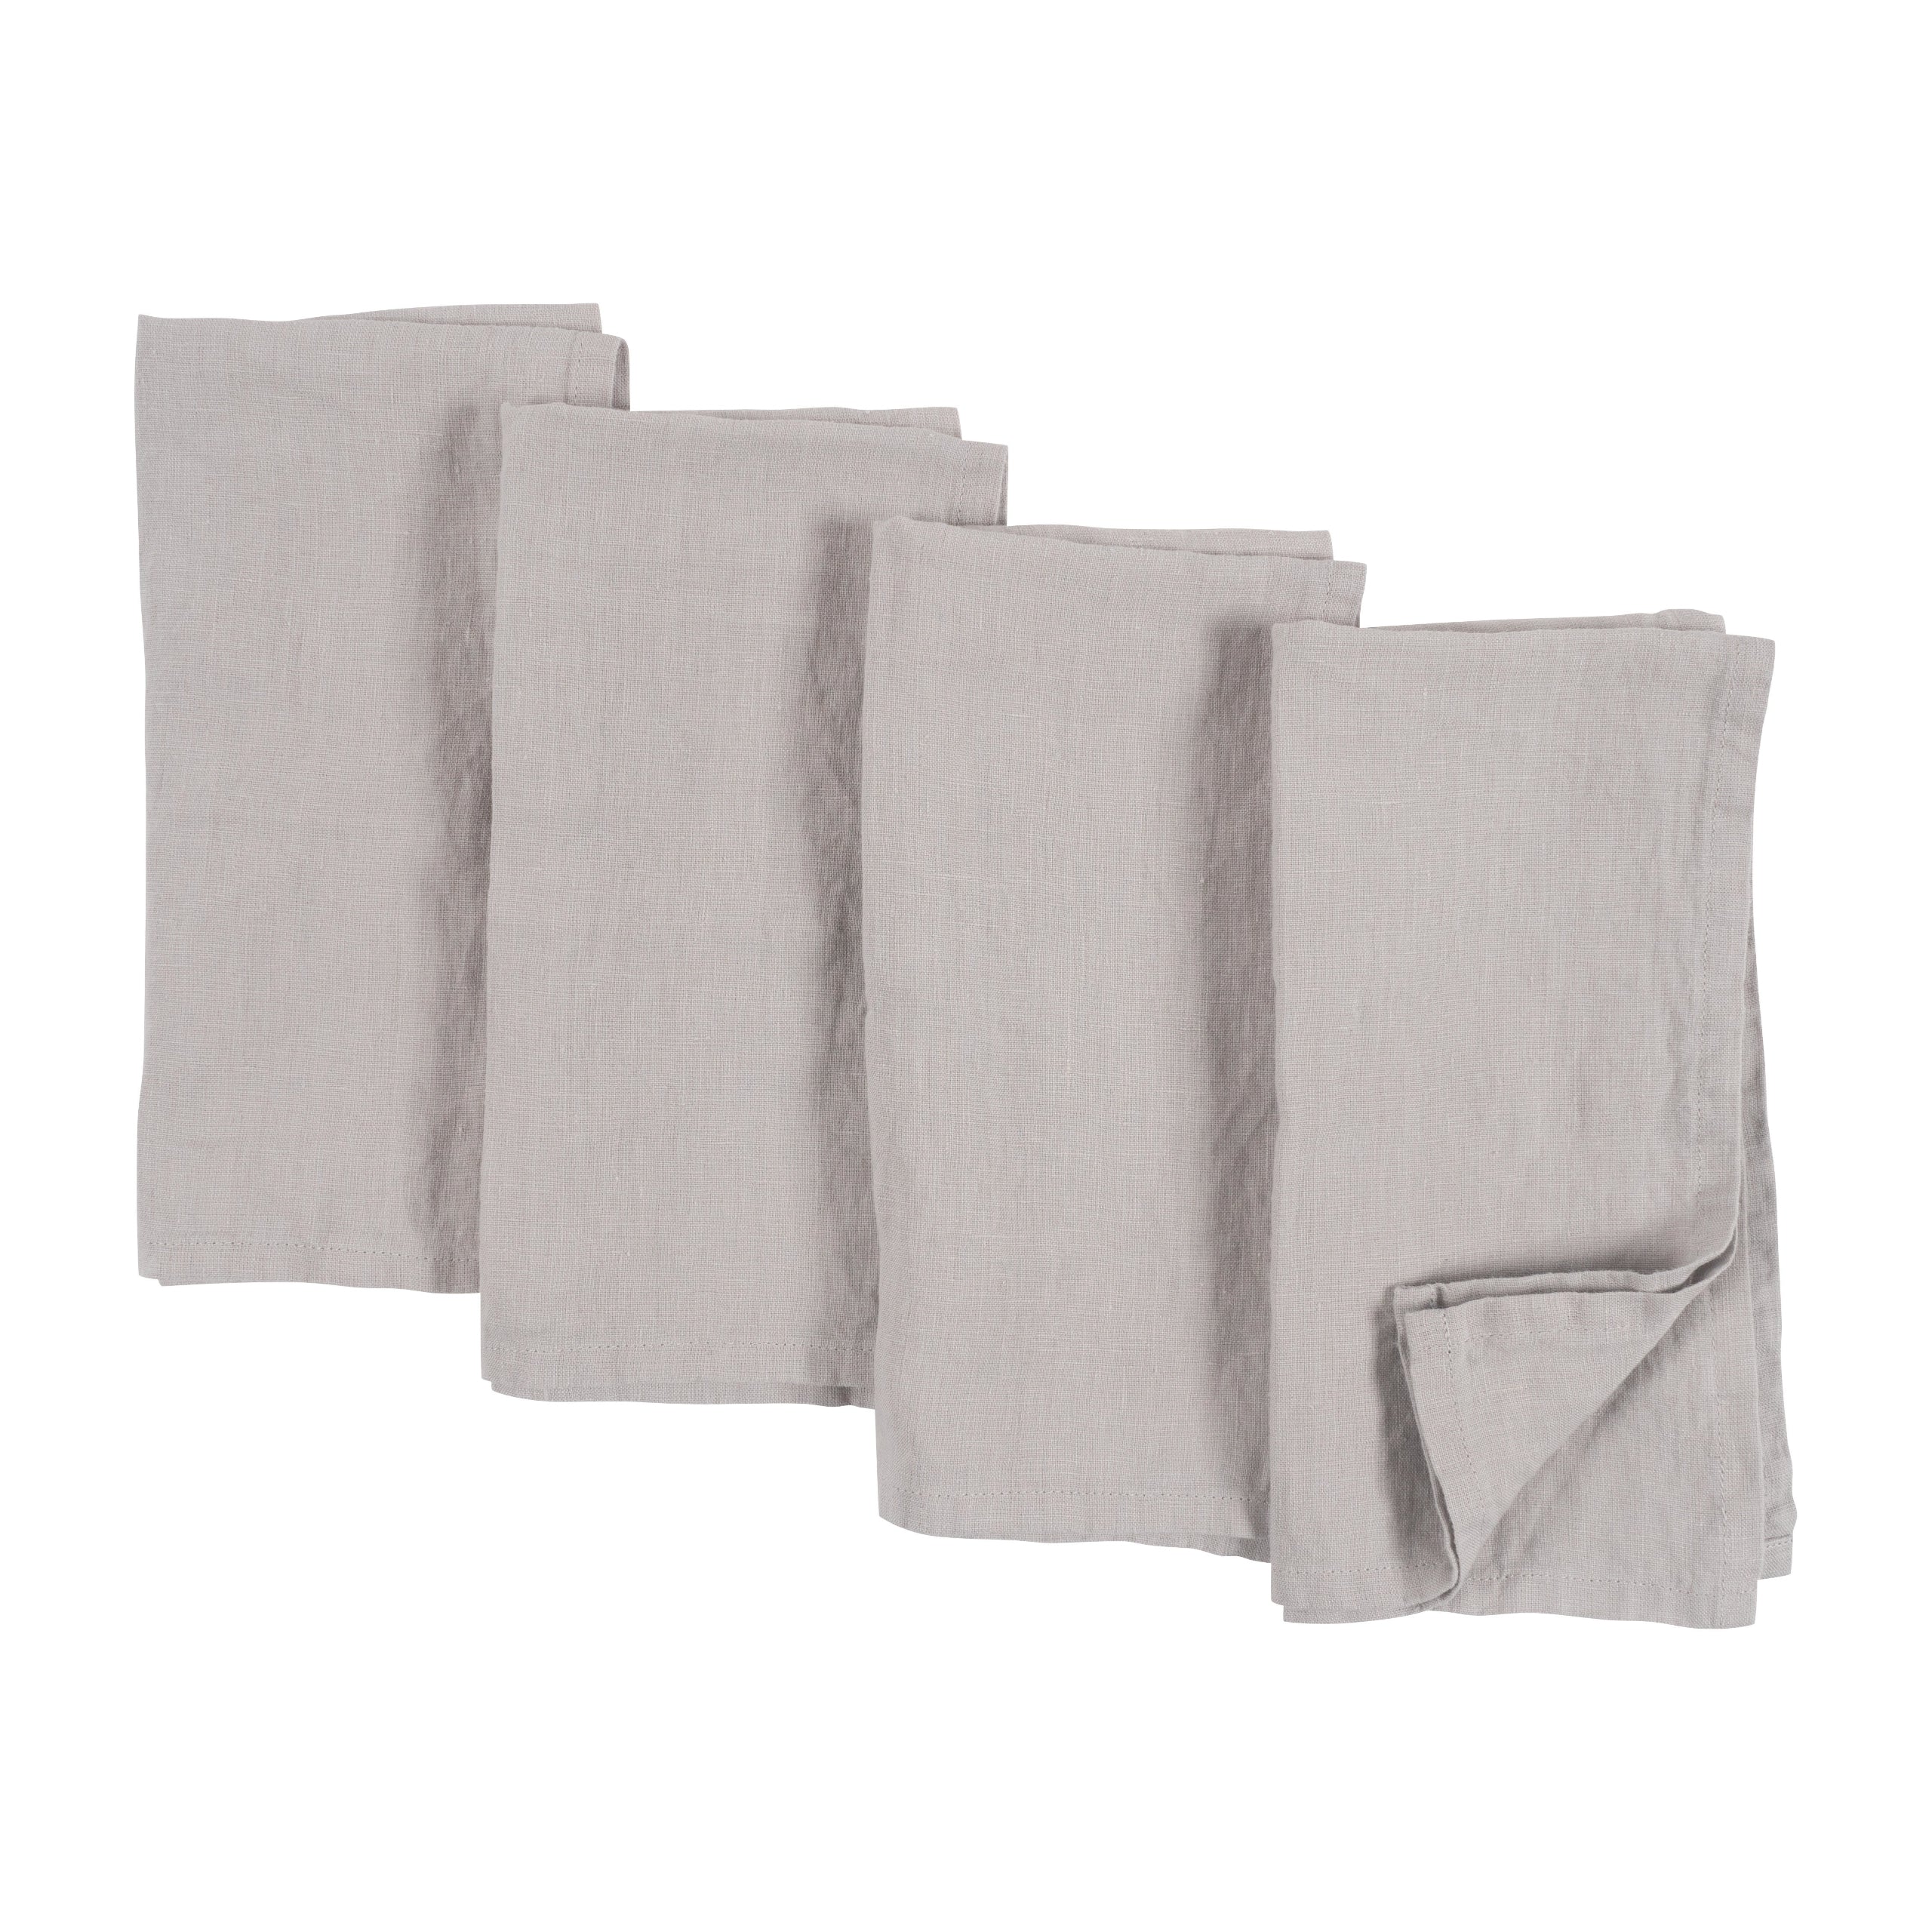 A Set of 24-hemstitch Linen Napkins in White Color, 50x50 Cm 20x20